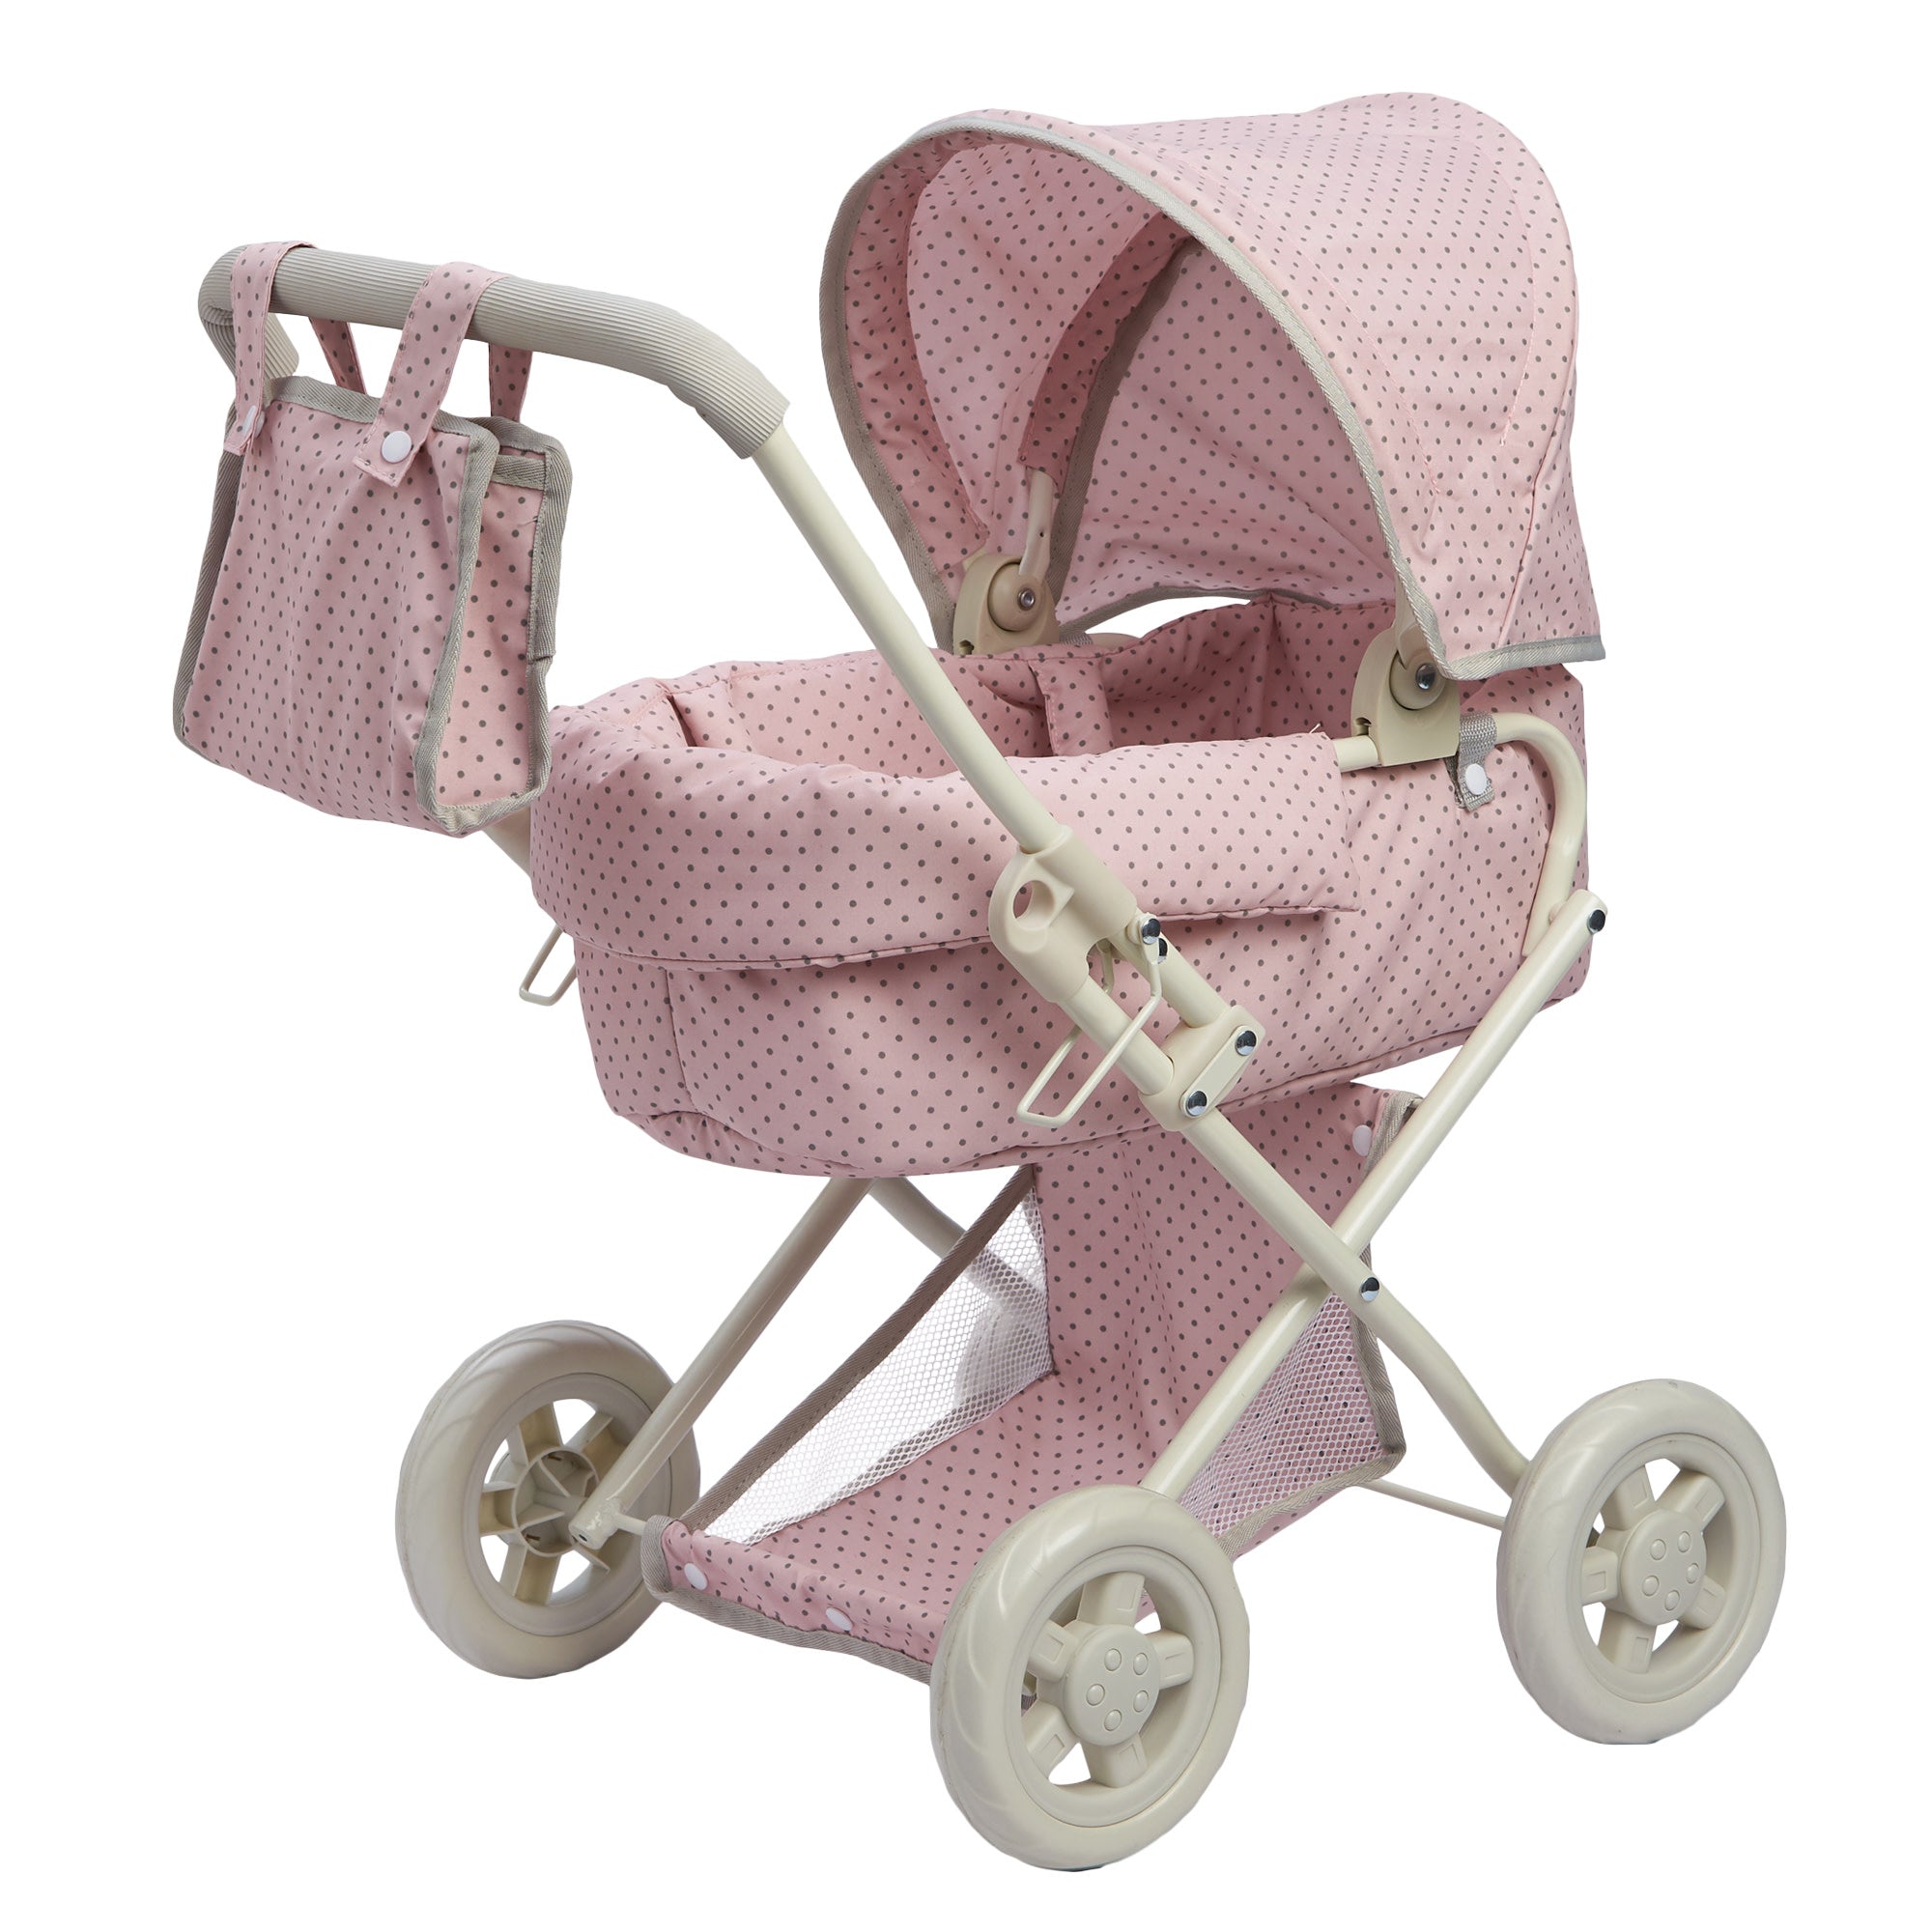 Olivia's Little World Polka Dots Princess Deluxe Baby Doll Stroller, Pink